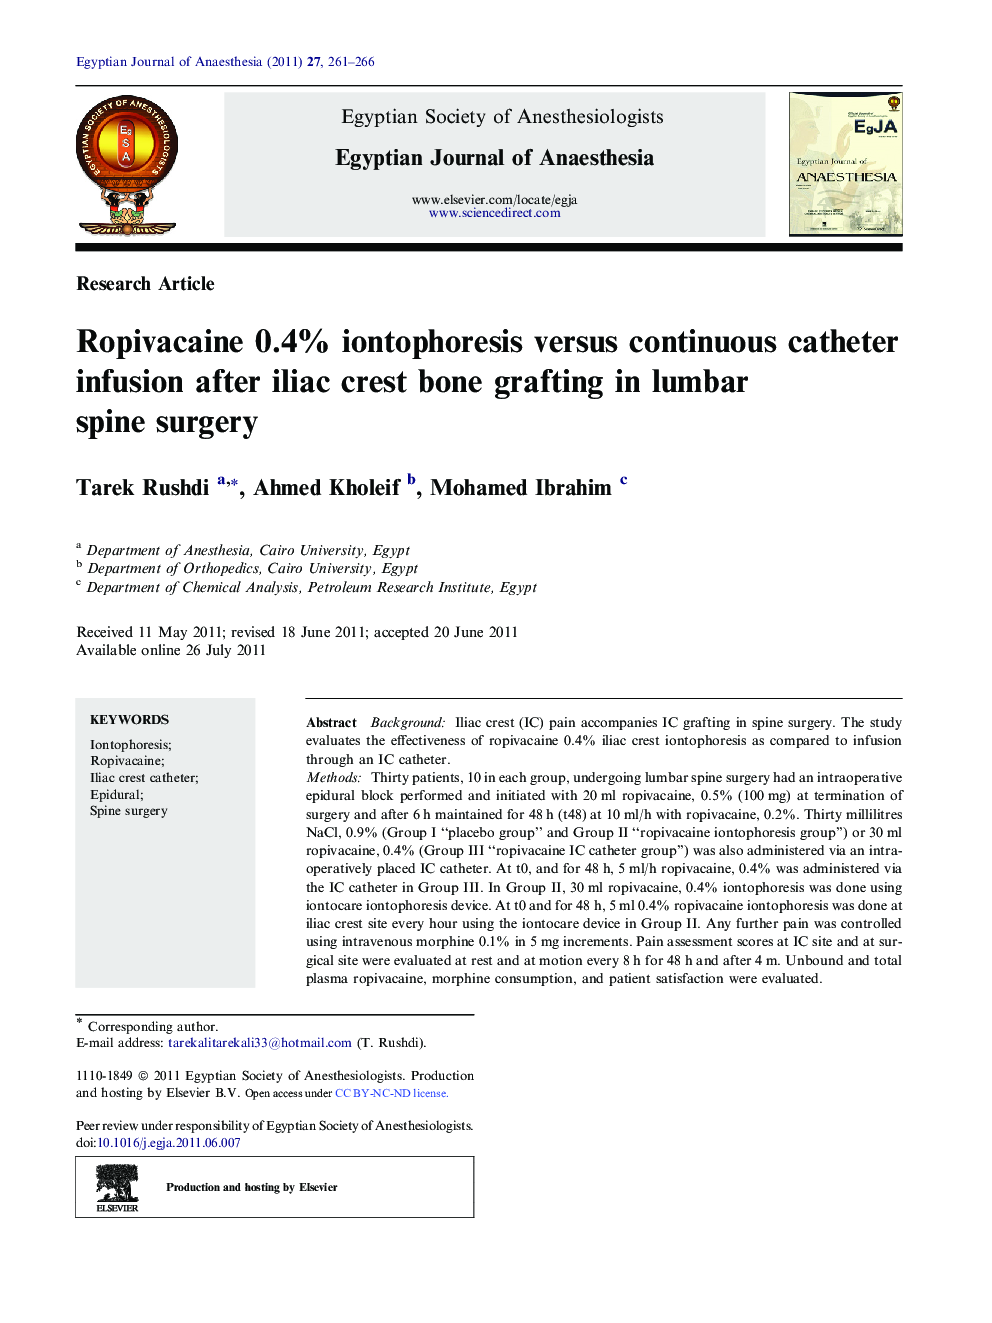 Ropivacaine 0.4% iontophoresis versus continuous catheter infusion after iliac crest bone grafting in lumbar spine surgery 